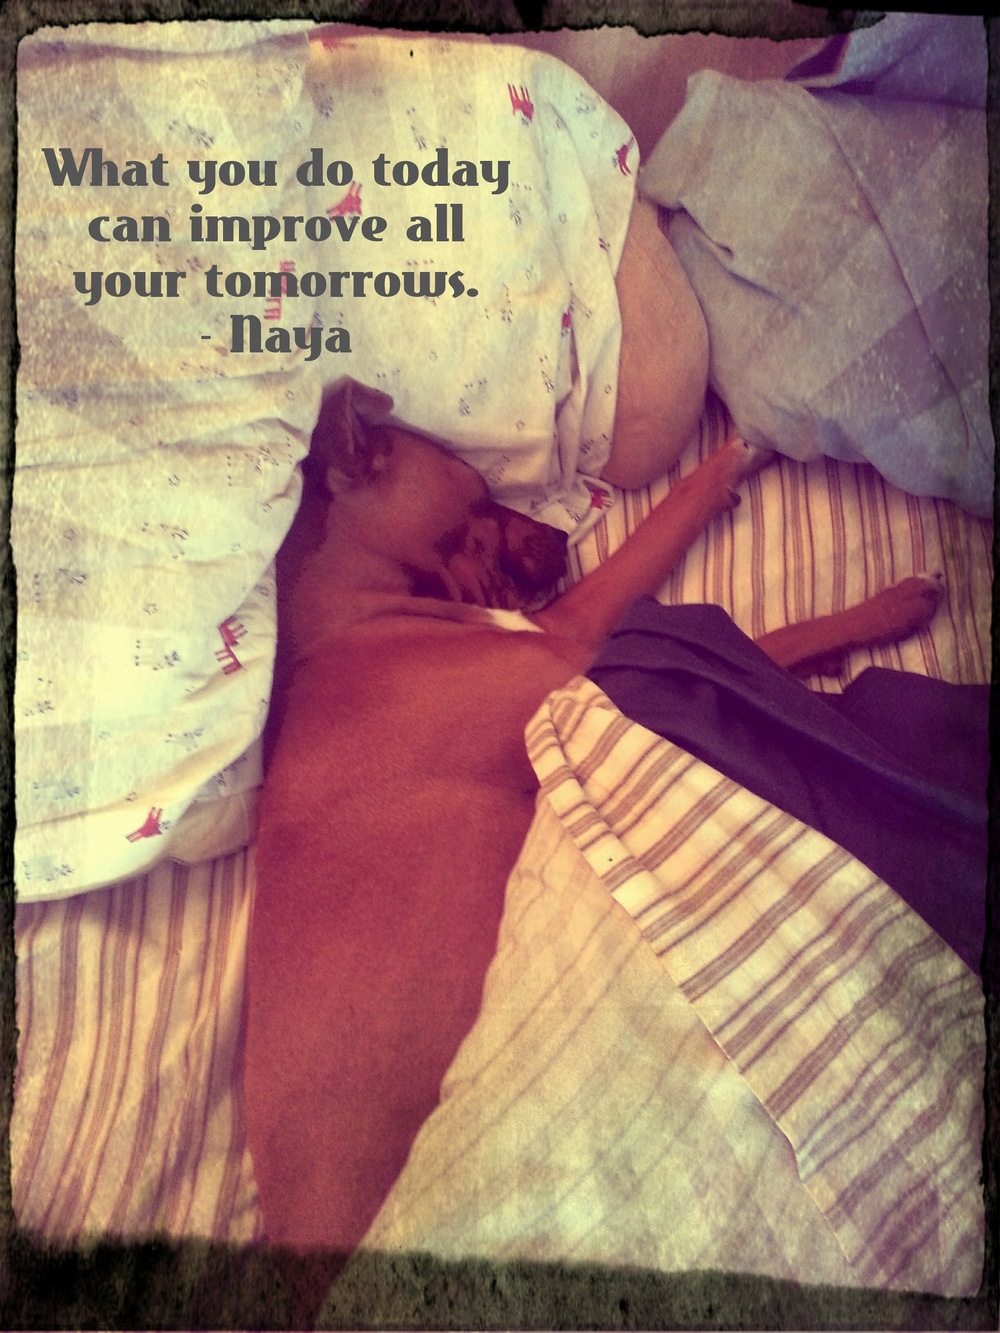   What you do today can improve all your tomorrows.    - Naya  